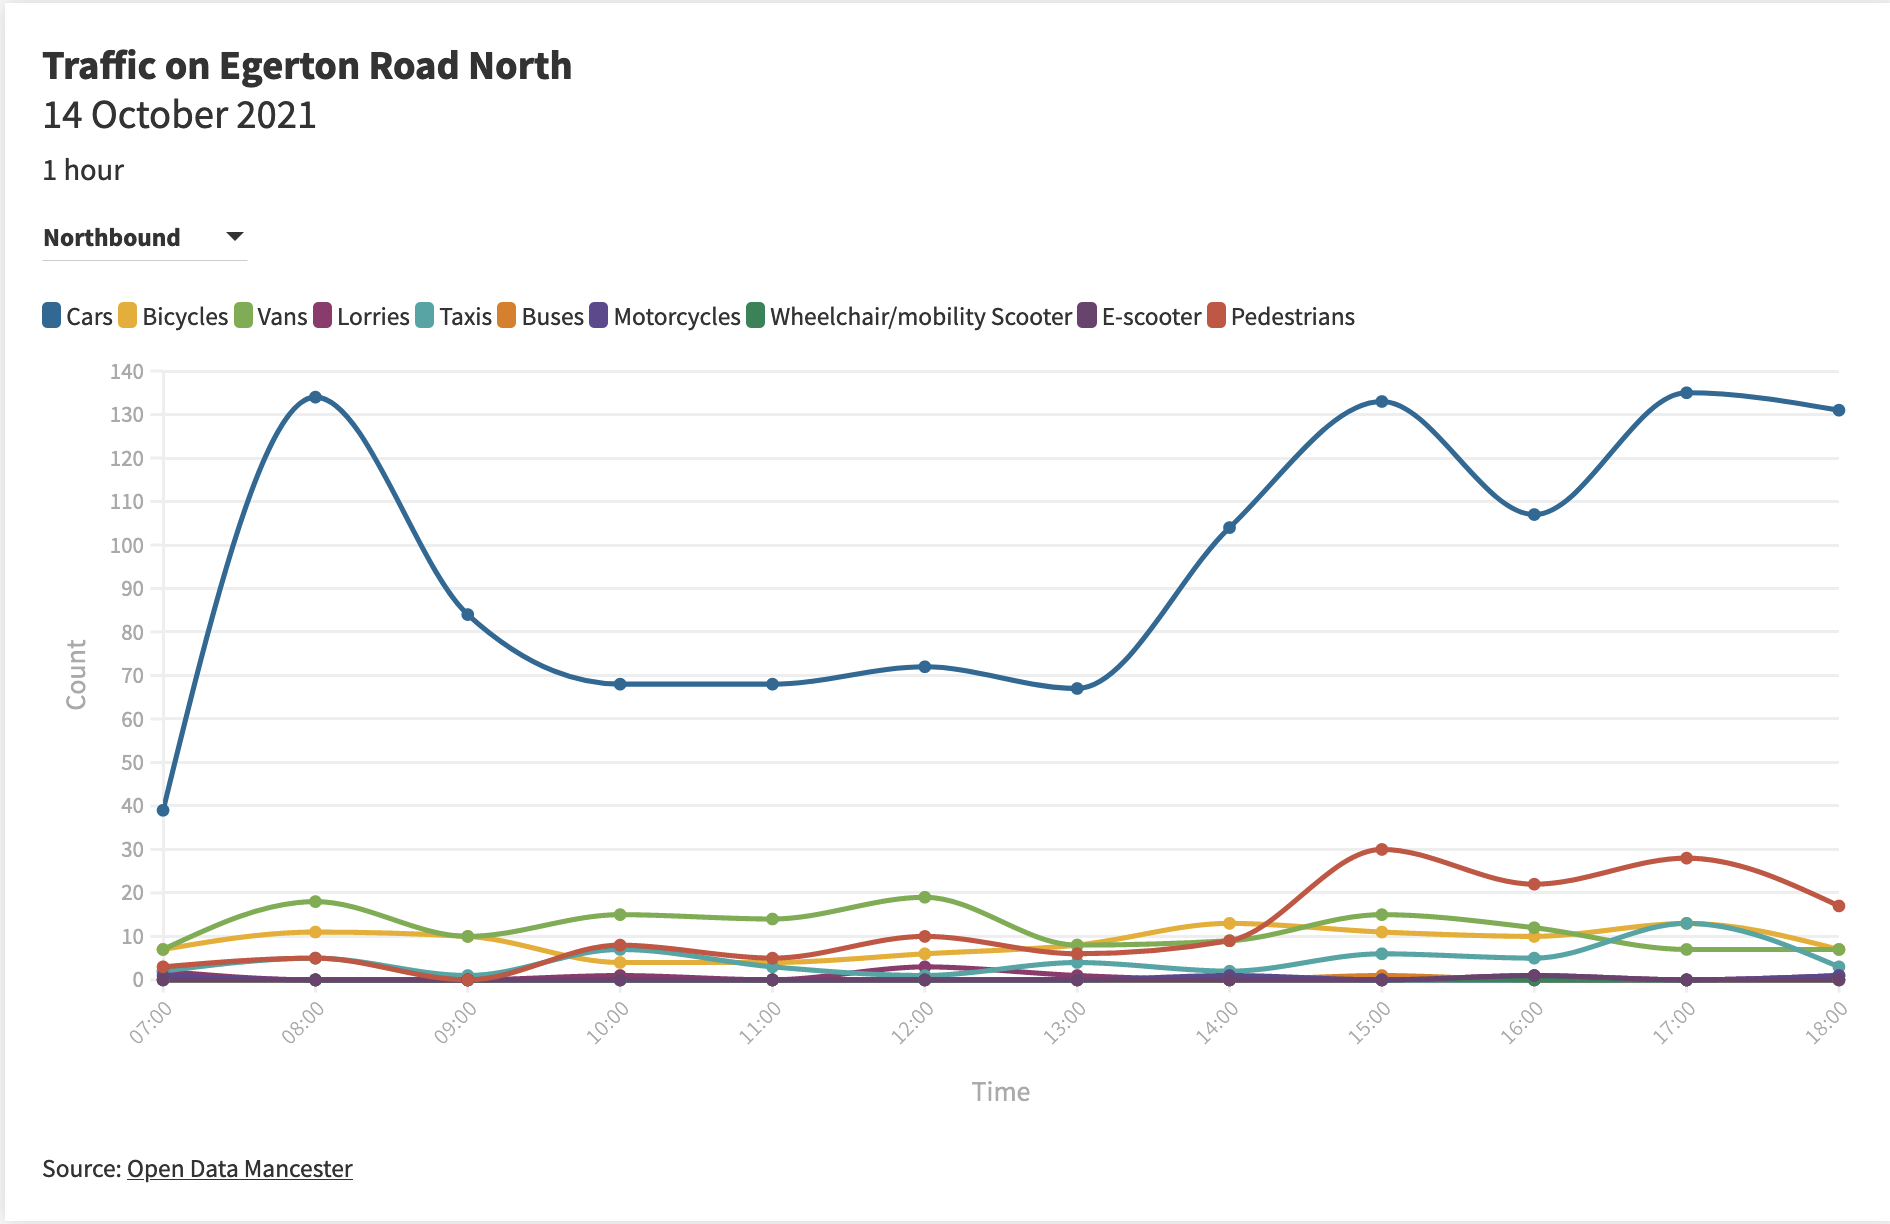 This is a graph showing total traffic recorded per hour on Egerton Road North